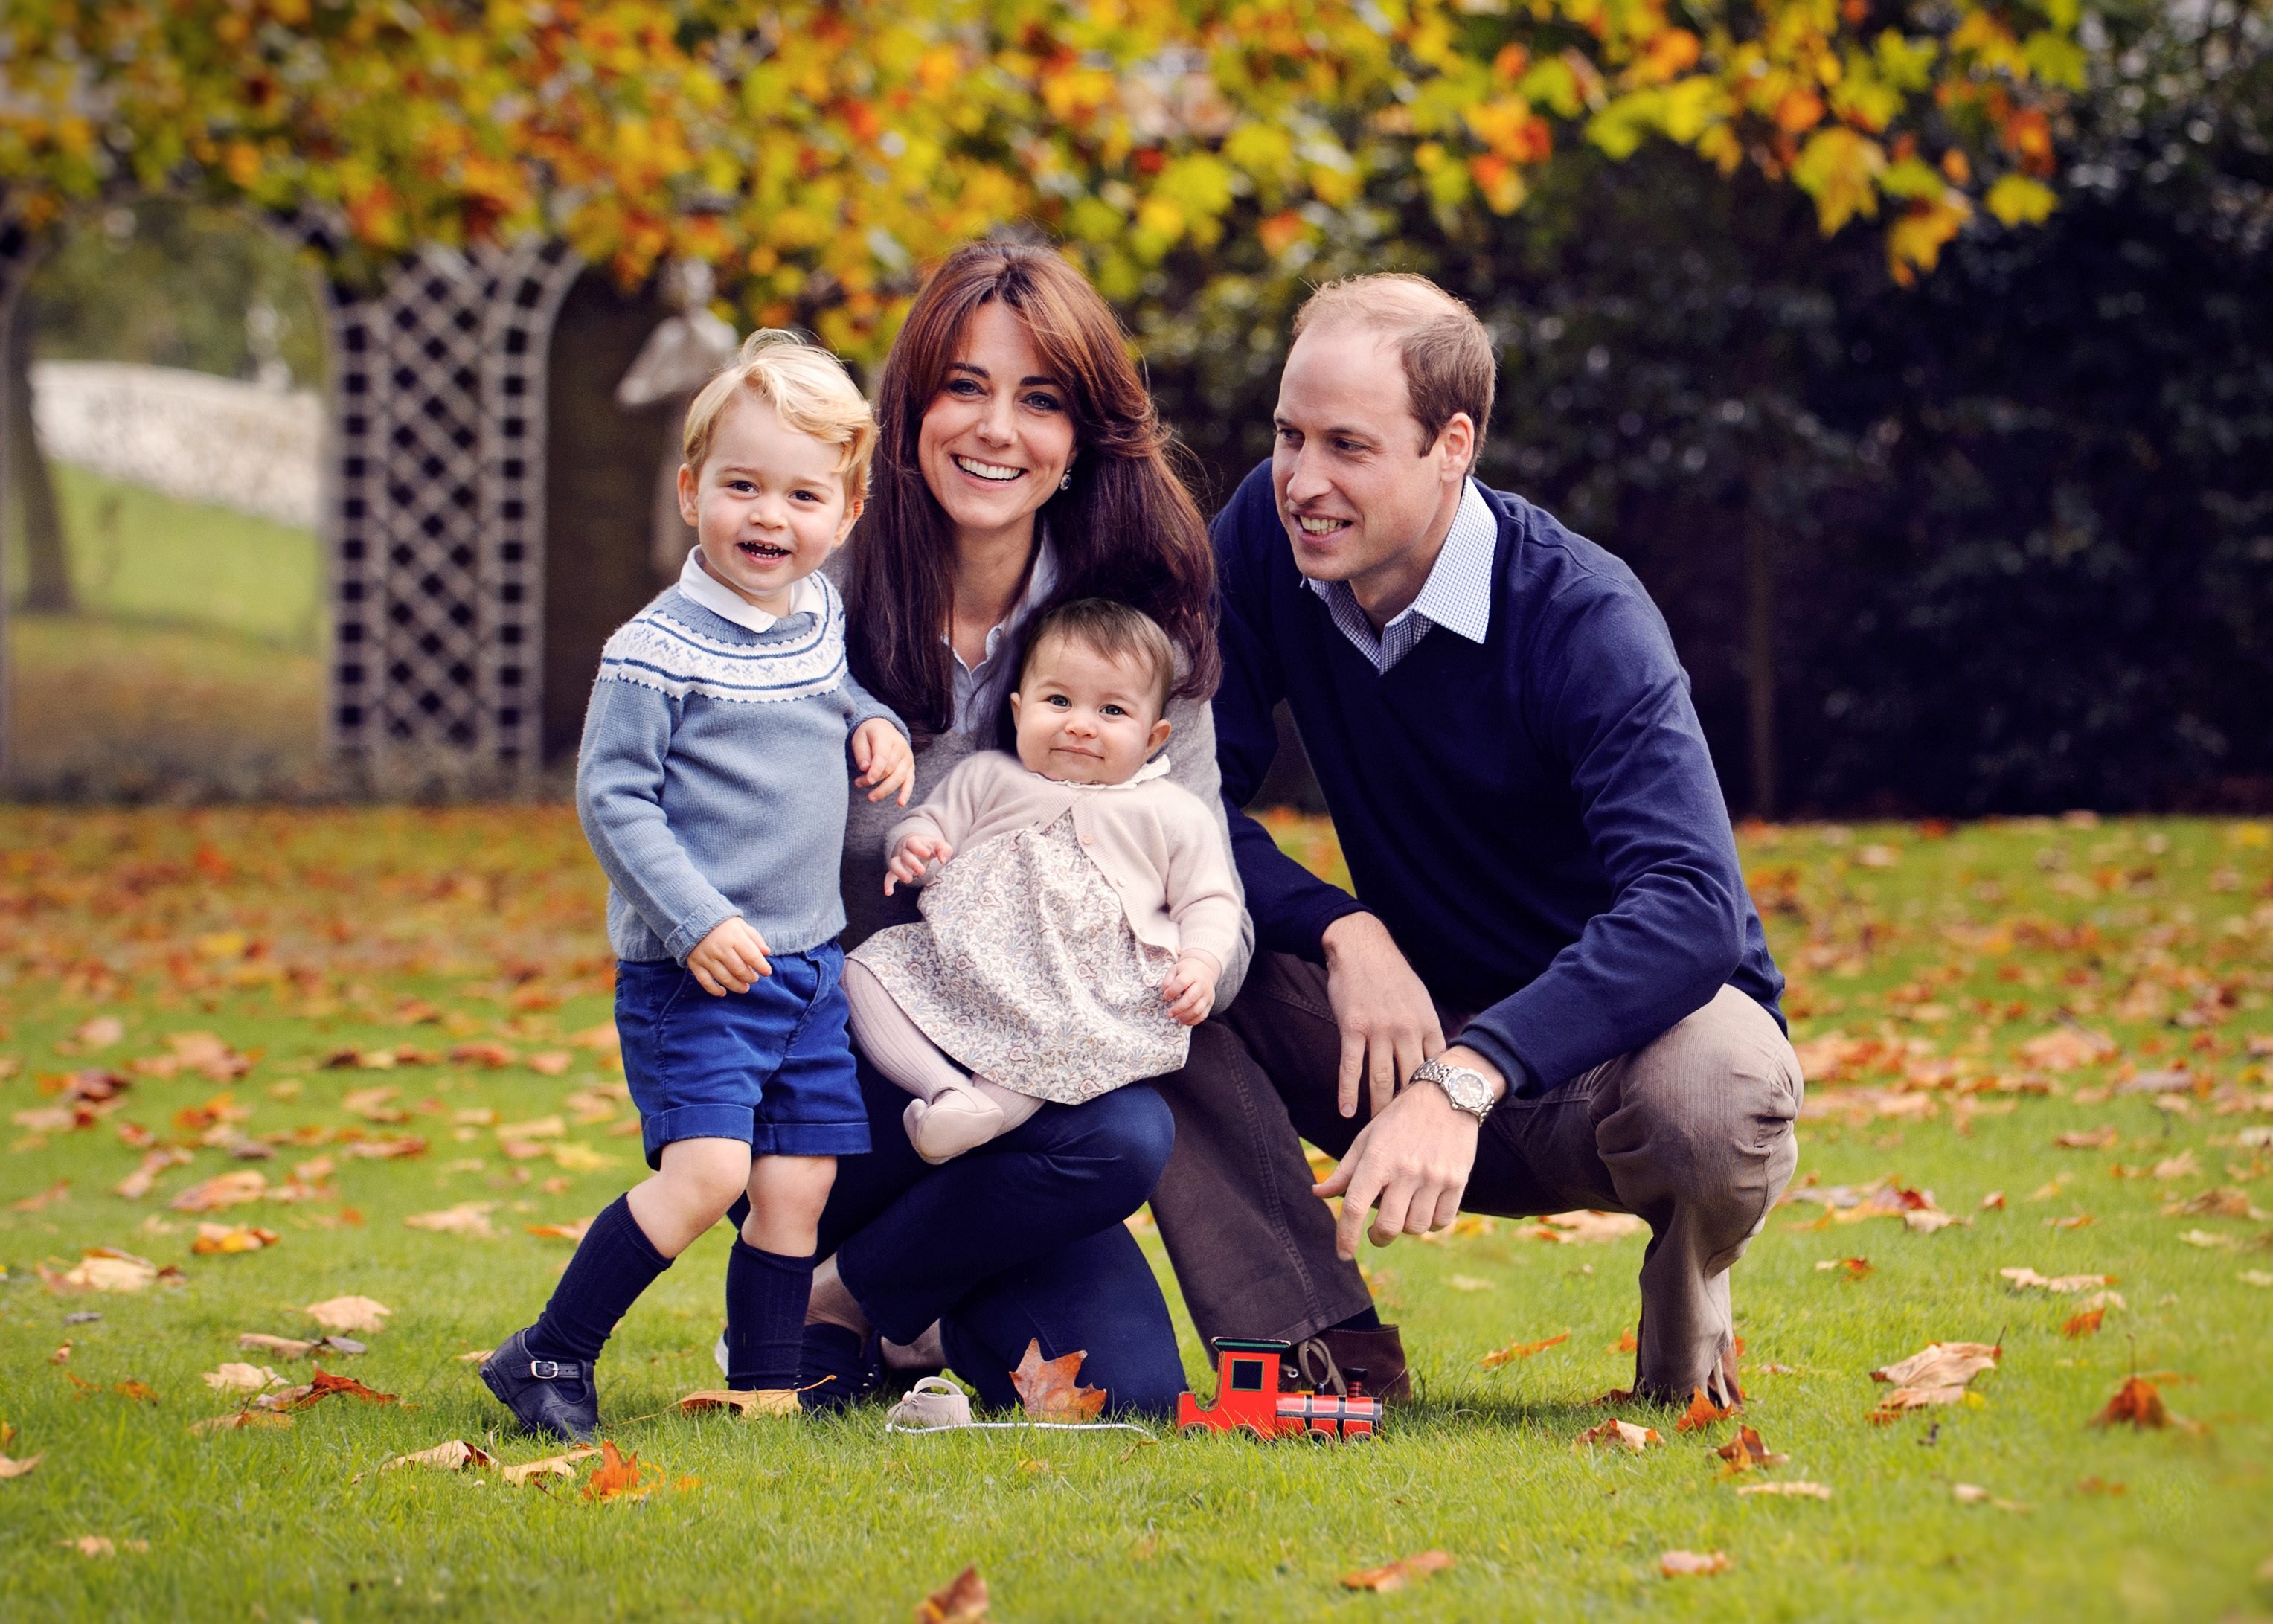 The royal family's holiday card, taken in late October 2015 at Kensington Palace in London. (Chris Jelf—AFP/Getty Images)